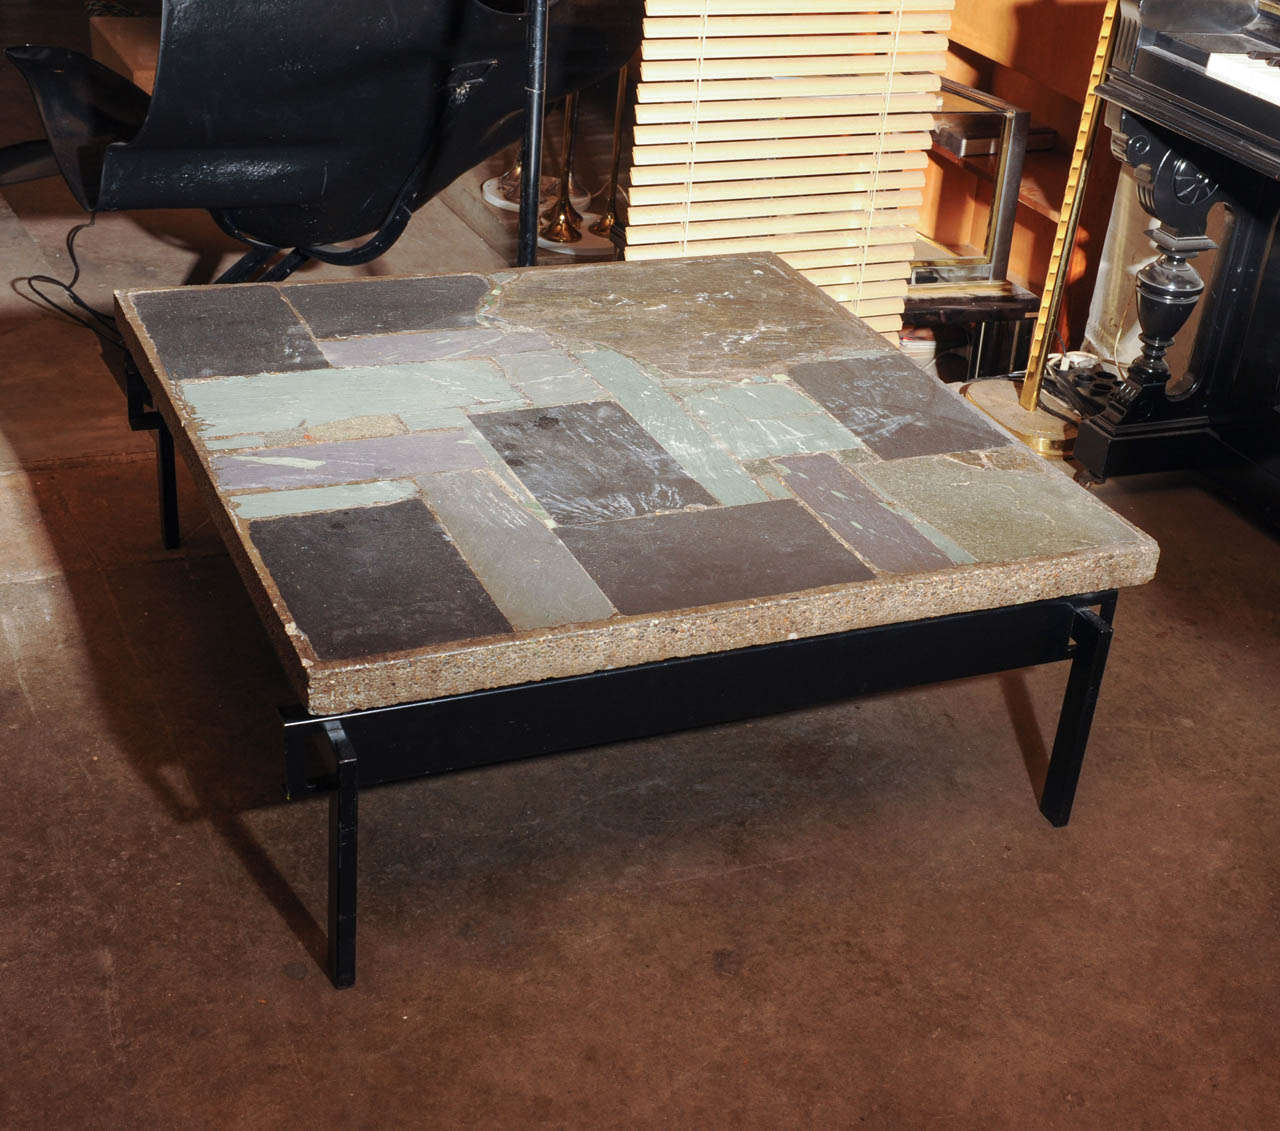 Amazing large square one-of-a-kind coffee table by dutch designer Paul Kingma. Natural slate stone with precious stones inlay in a blue-green-gray tone pattern. Beautiful black lacquered base that holds the top. The table is signed Kingma underneath